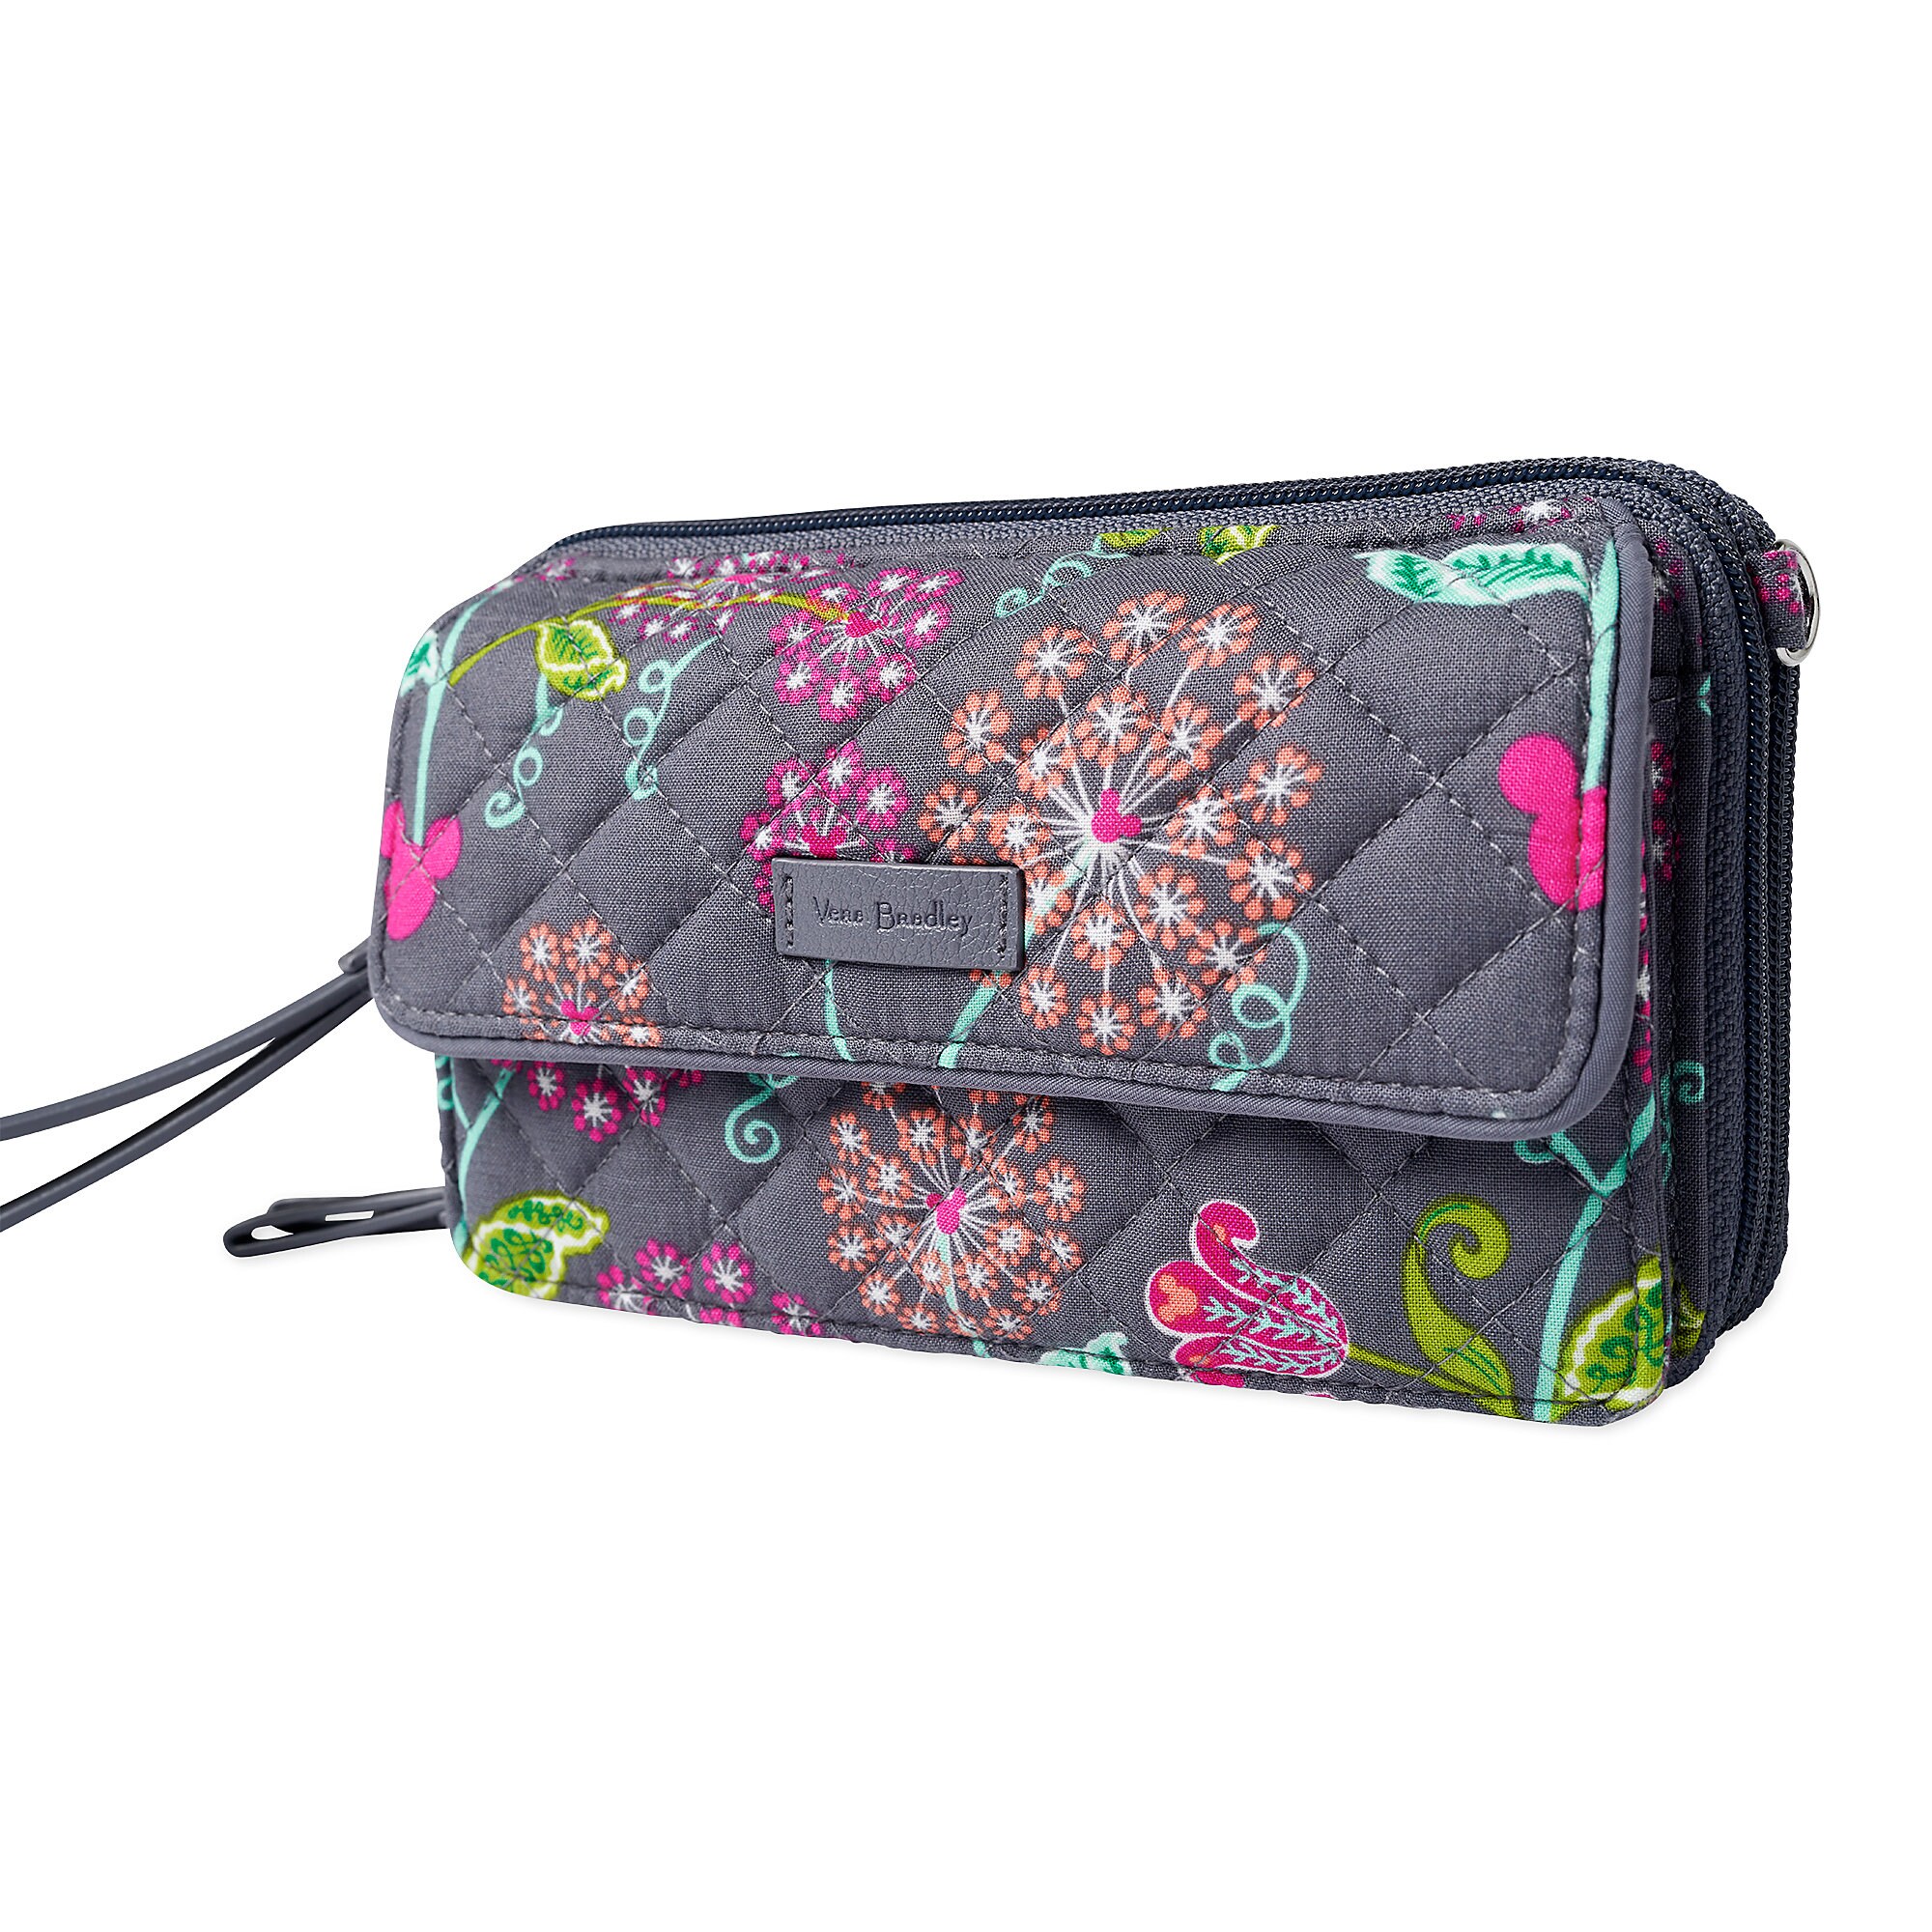 Mickey Mouse and Friends All in One Crossbody and Wristlet by Vera Bradley